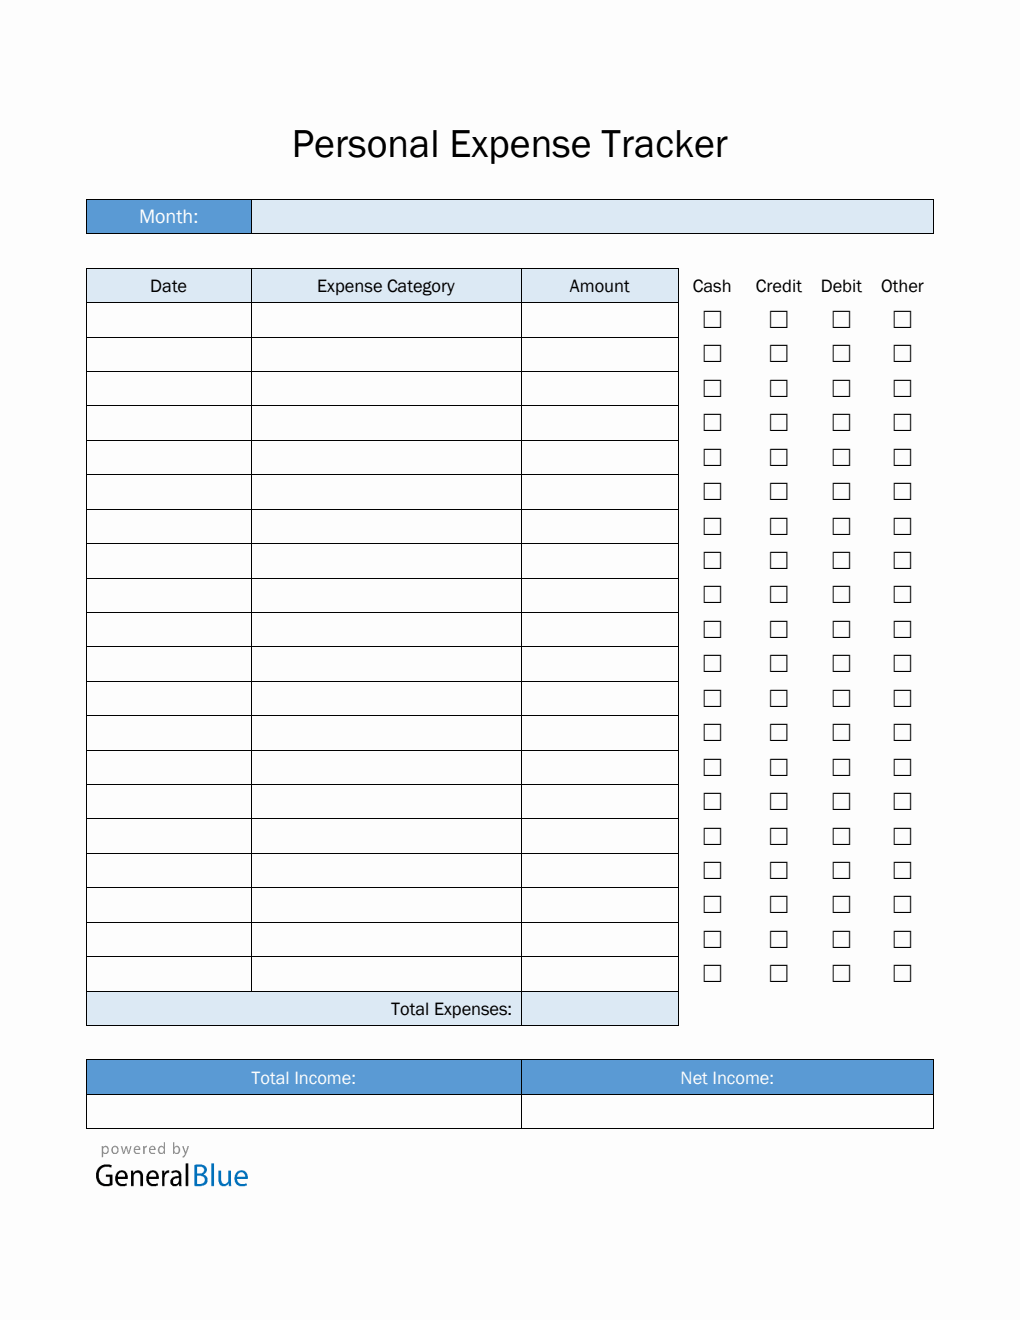 Personal Expense Tracker in PDF (Blue)